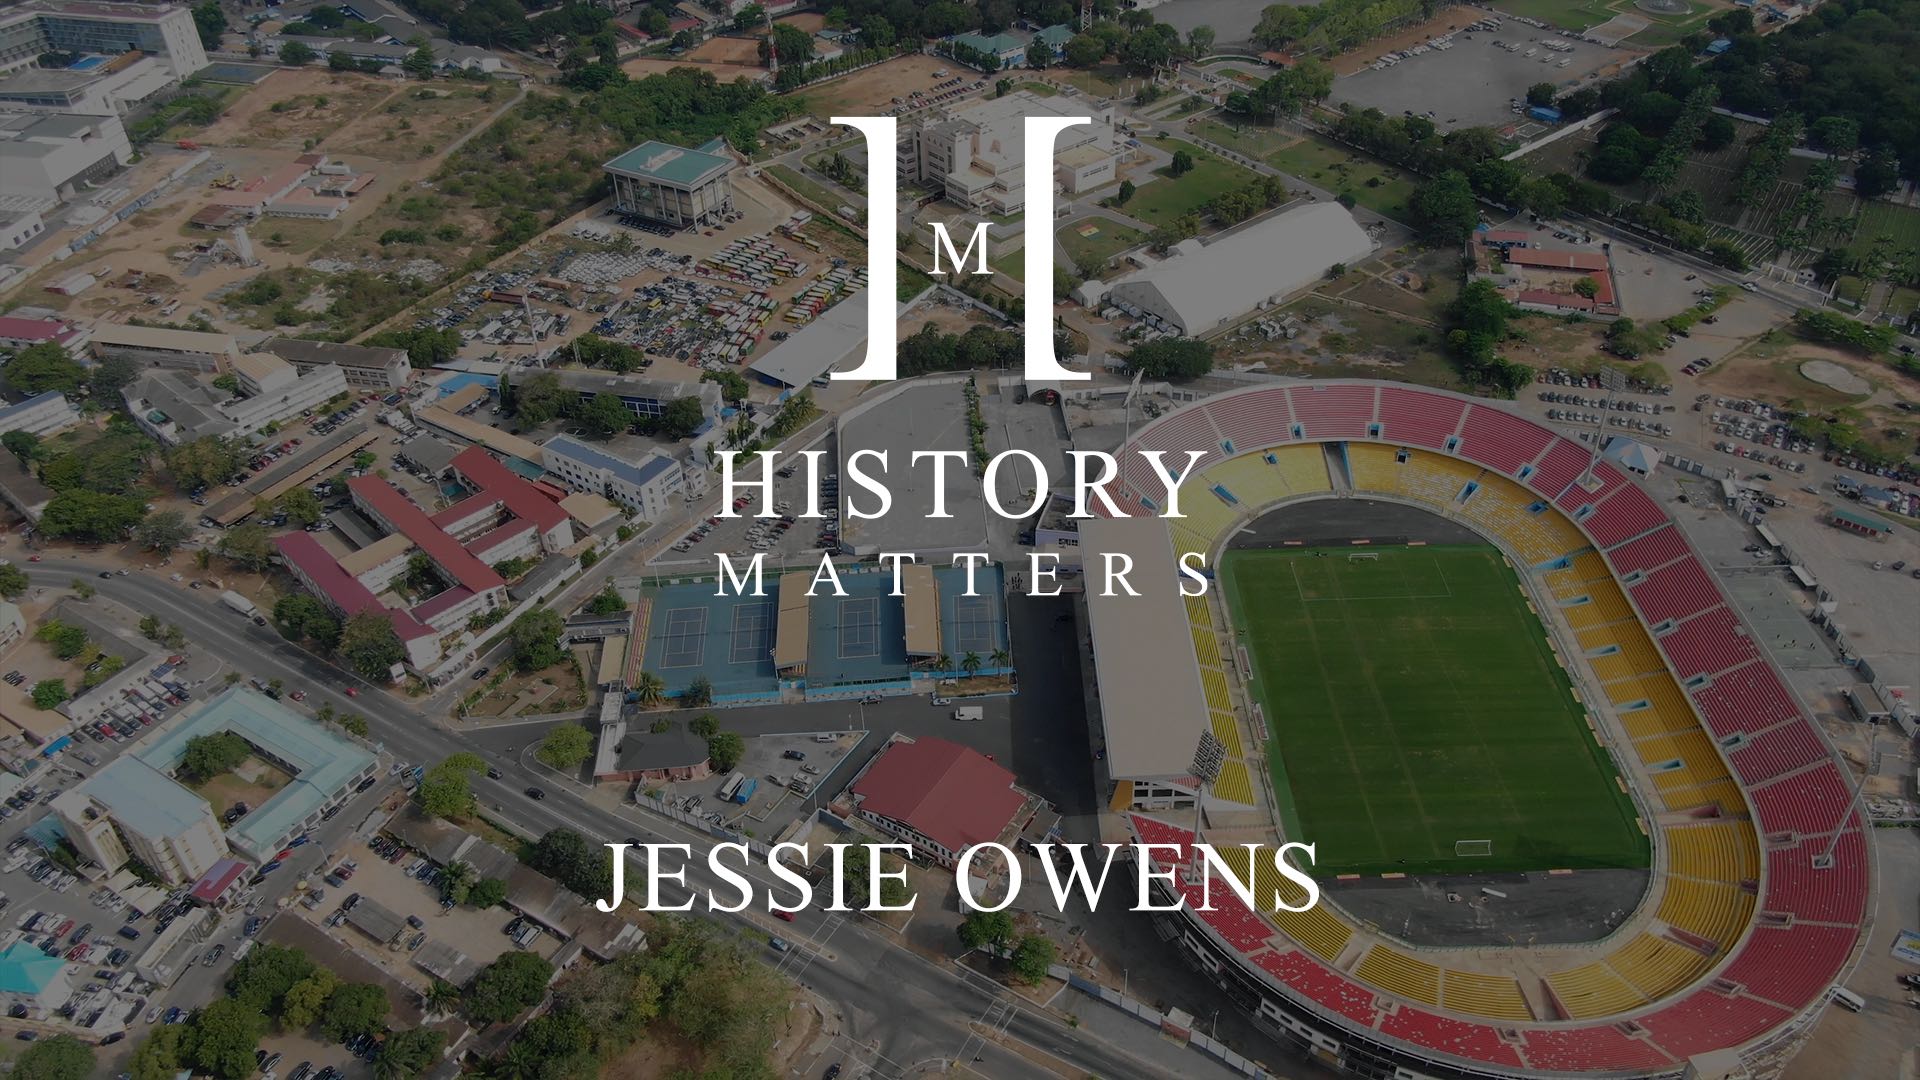 White History Matters Jessie Owens logo with dimmed background aerial view of buildings, tennis courts and stadium